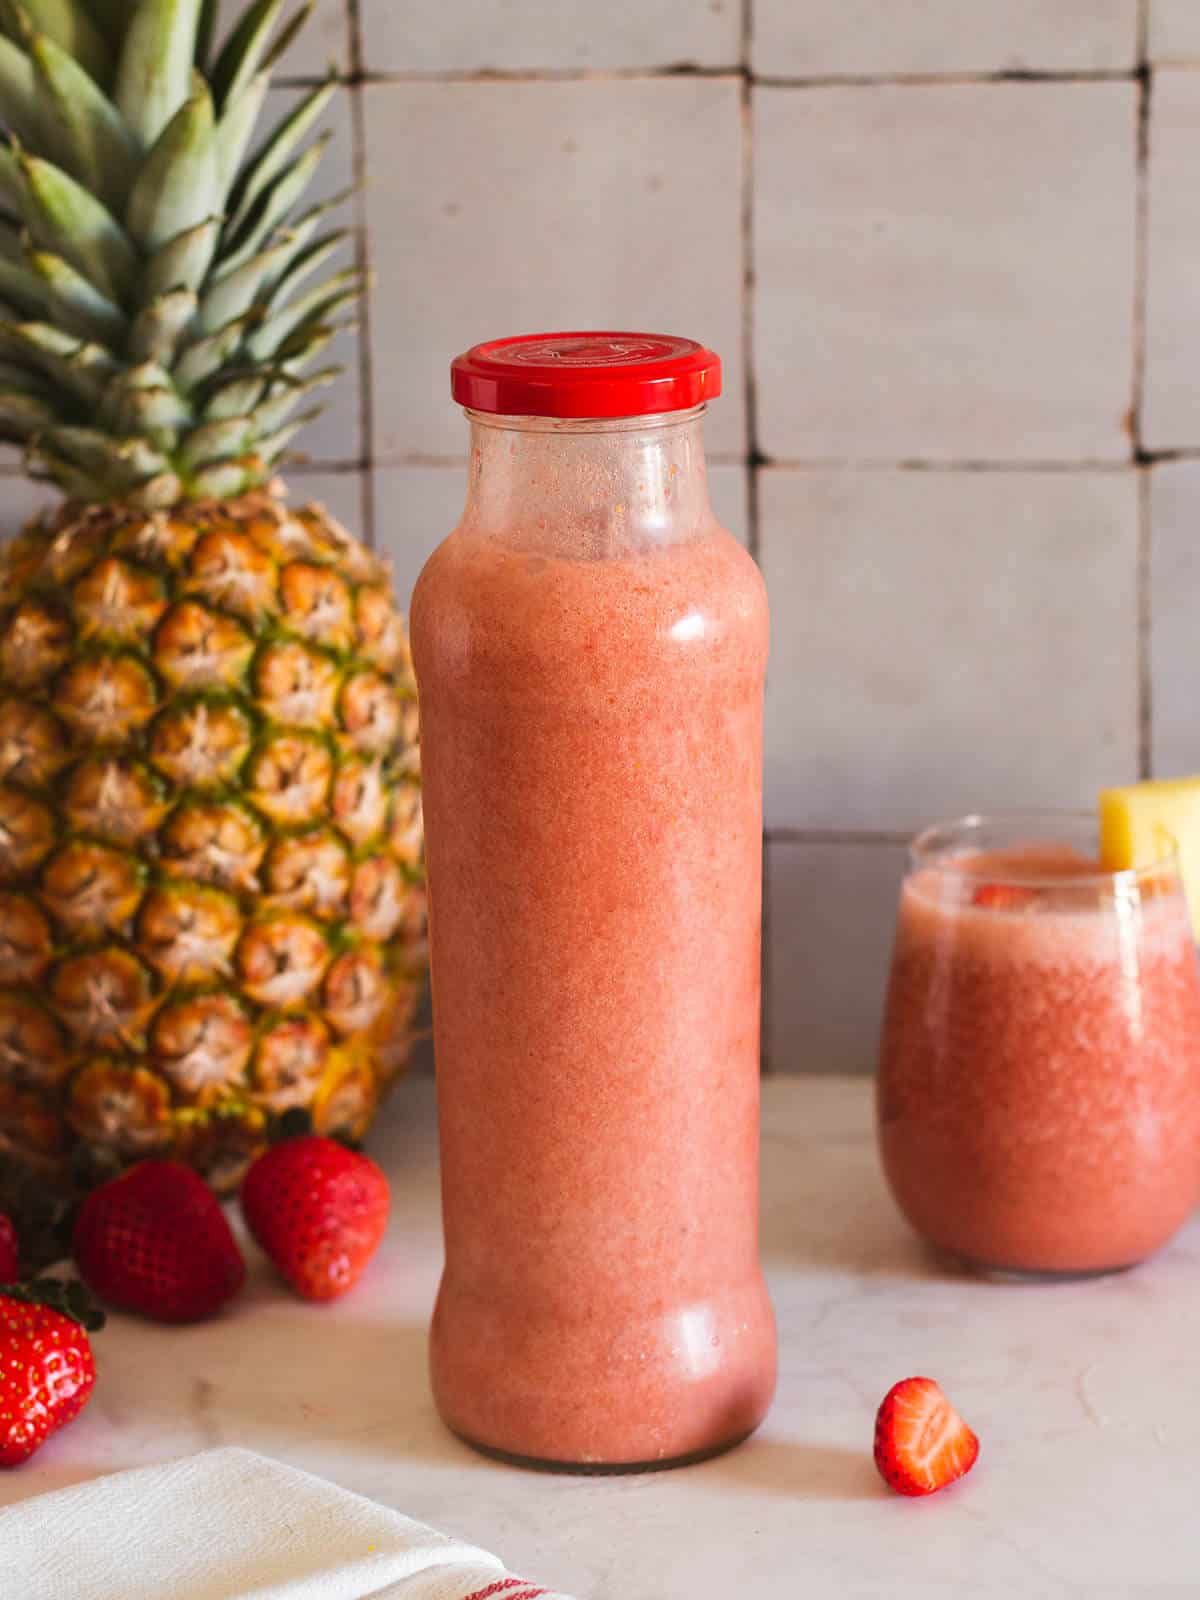 store the strawberry pineapple smoothie using an airtight container for up to three days